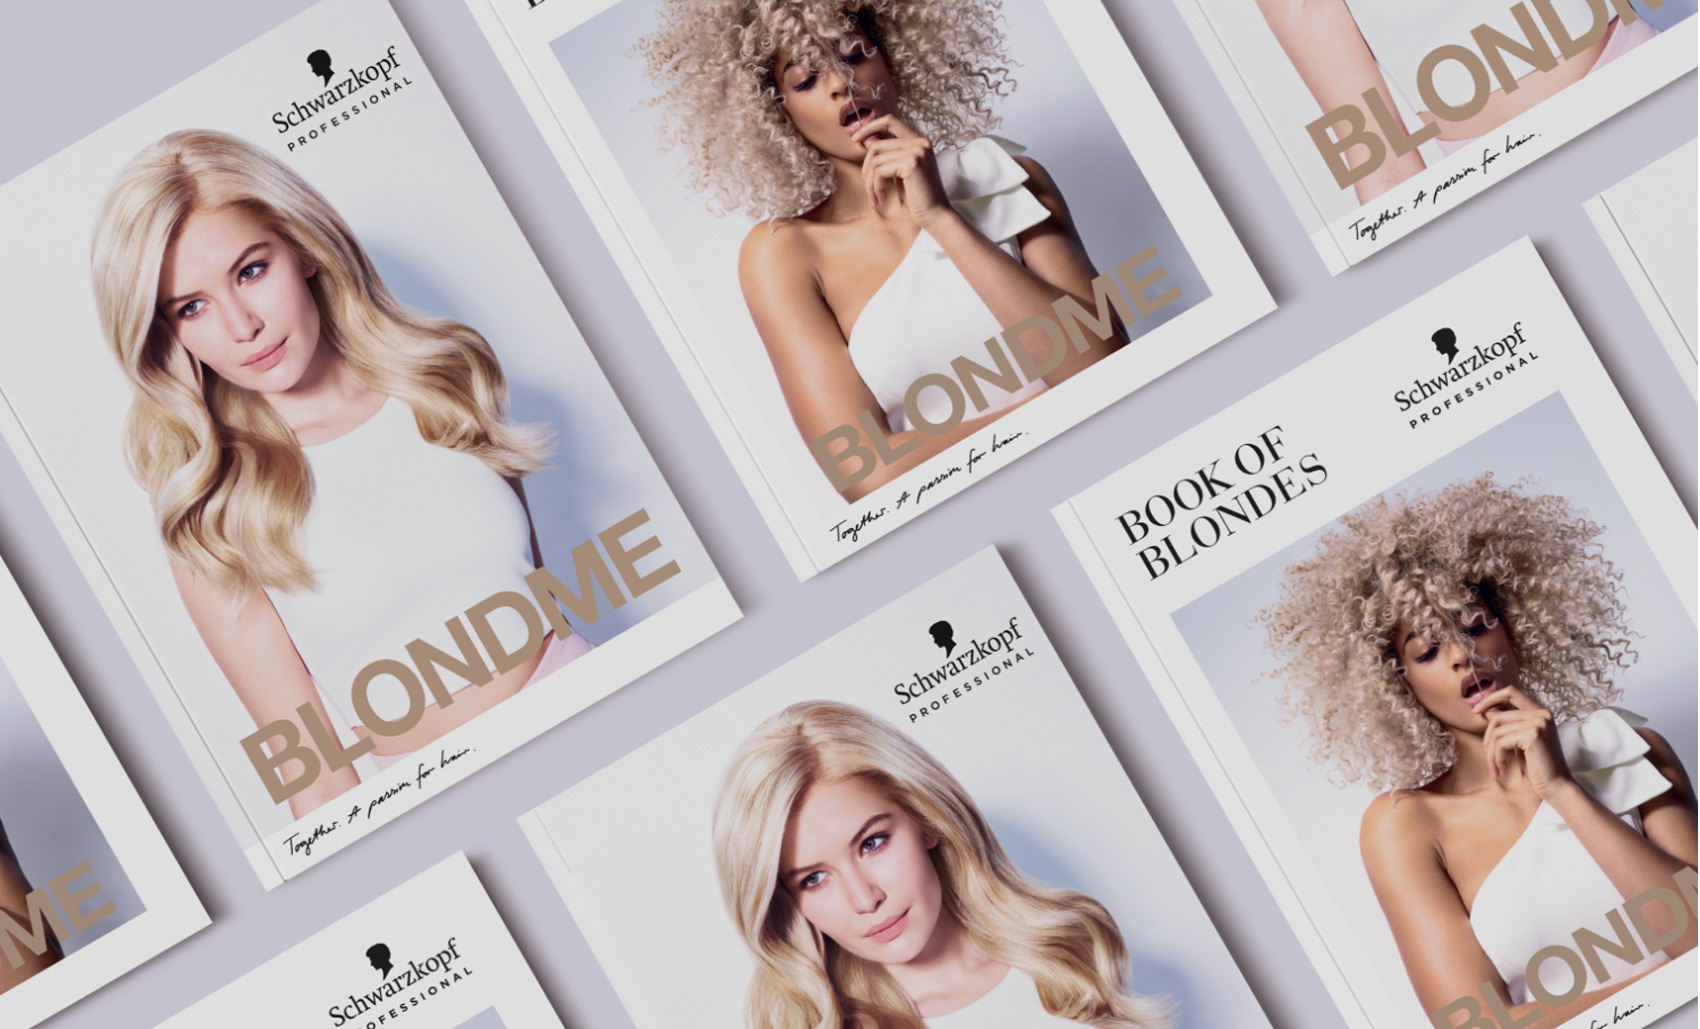 Isometric shot of brochures on table, featuring blonde women portraits